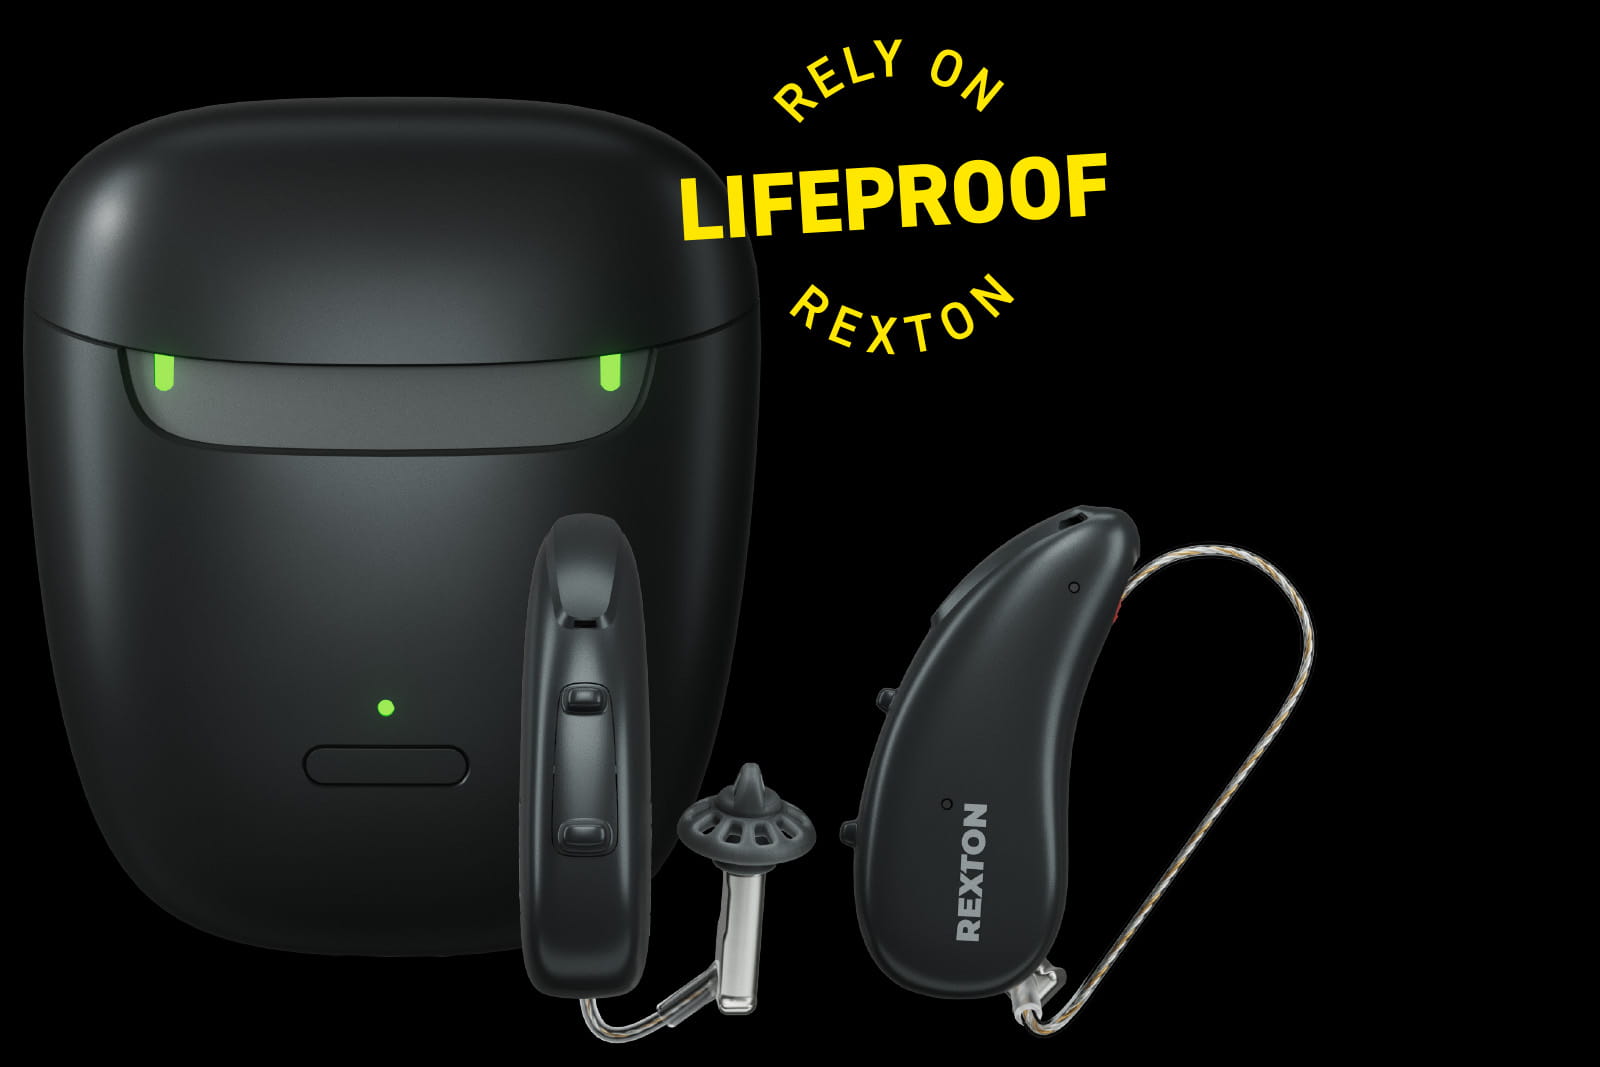 Rexton Reach R-Li rechargeable RIC hearing aids with charger